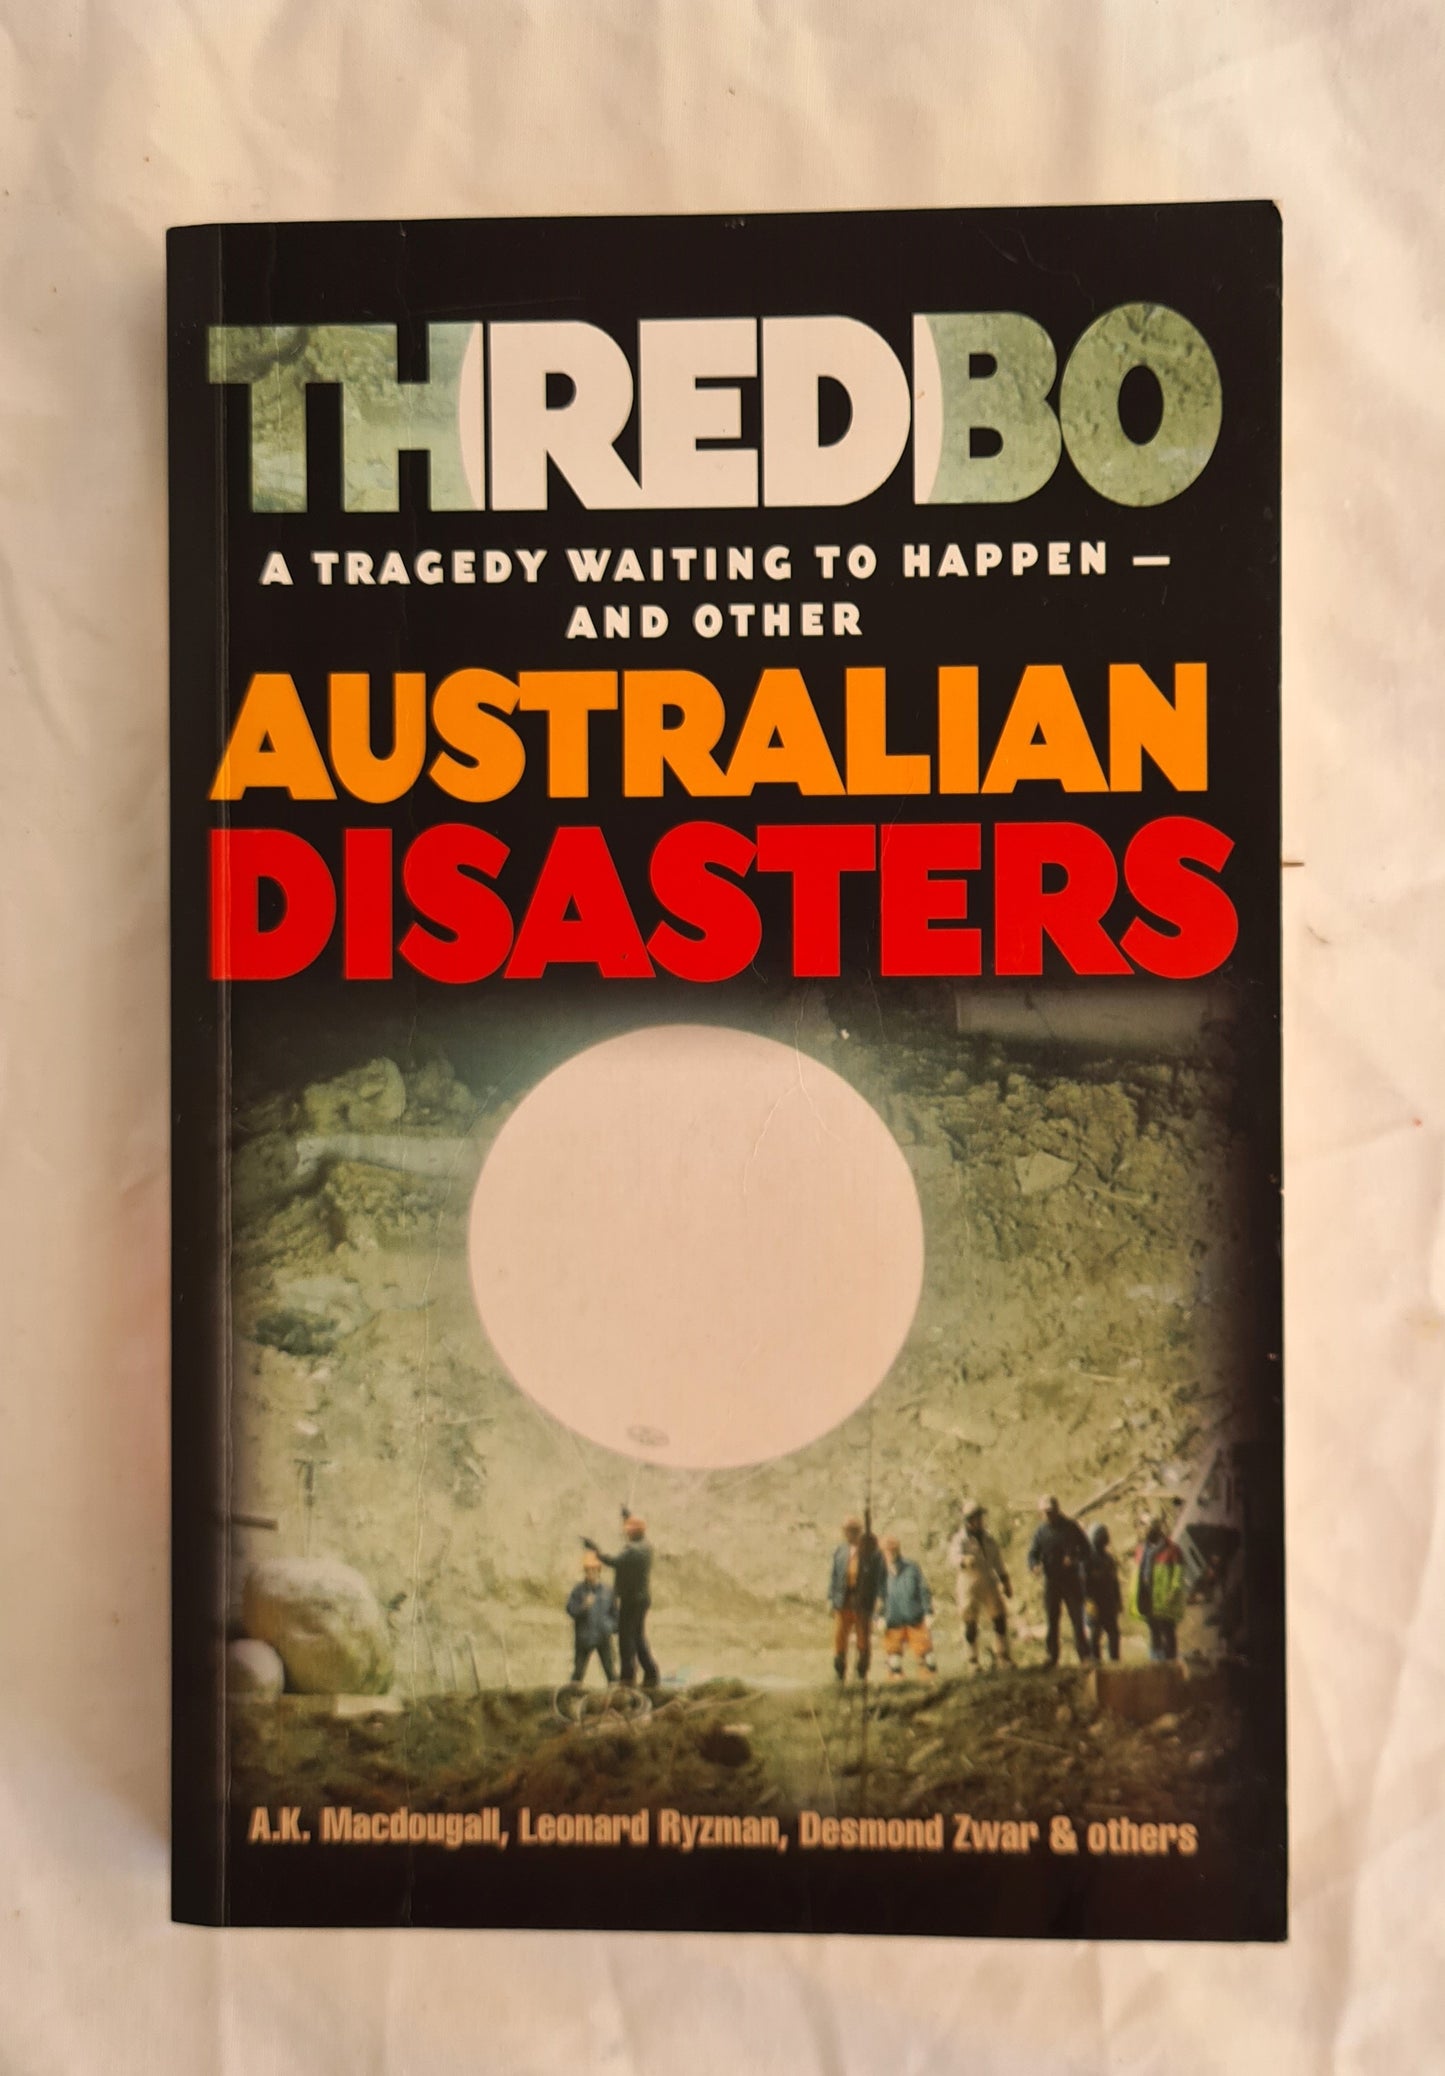 Thredbo  A Tragedy Waiting to Happen – and Other Australian Disasters  by A. K. Macdougall, Leonard Ryzman, Desmond Zwar and others